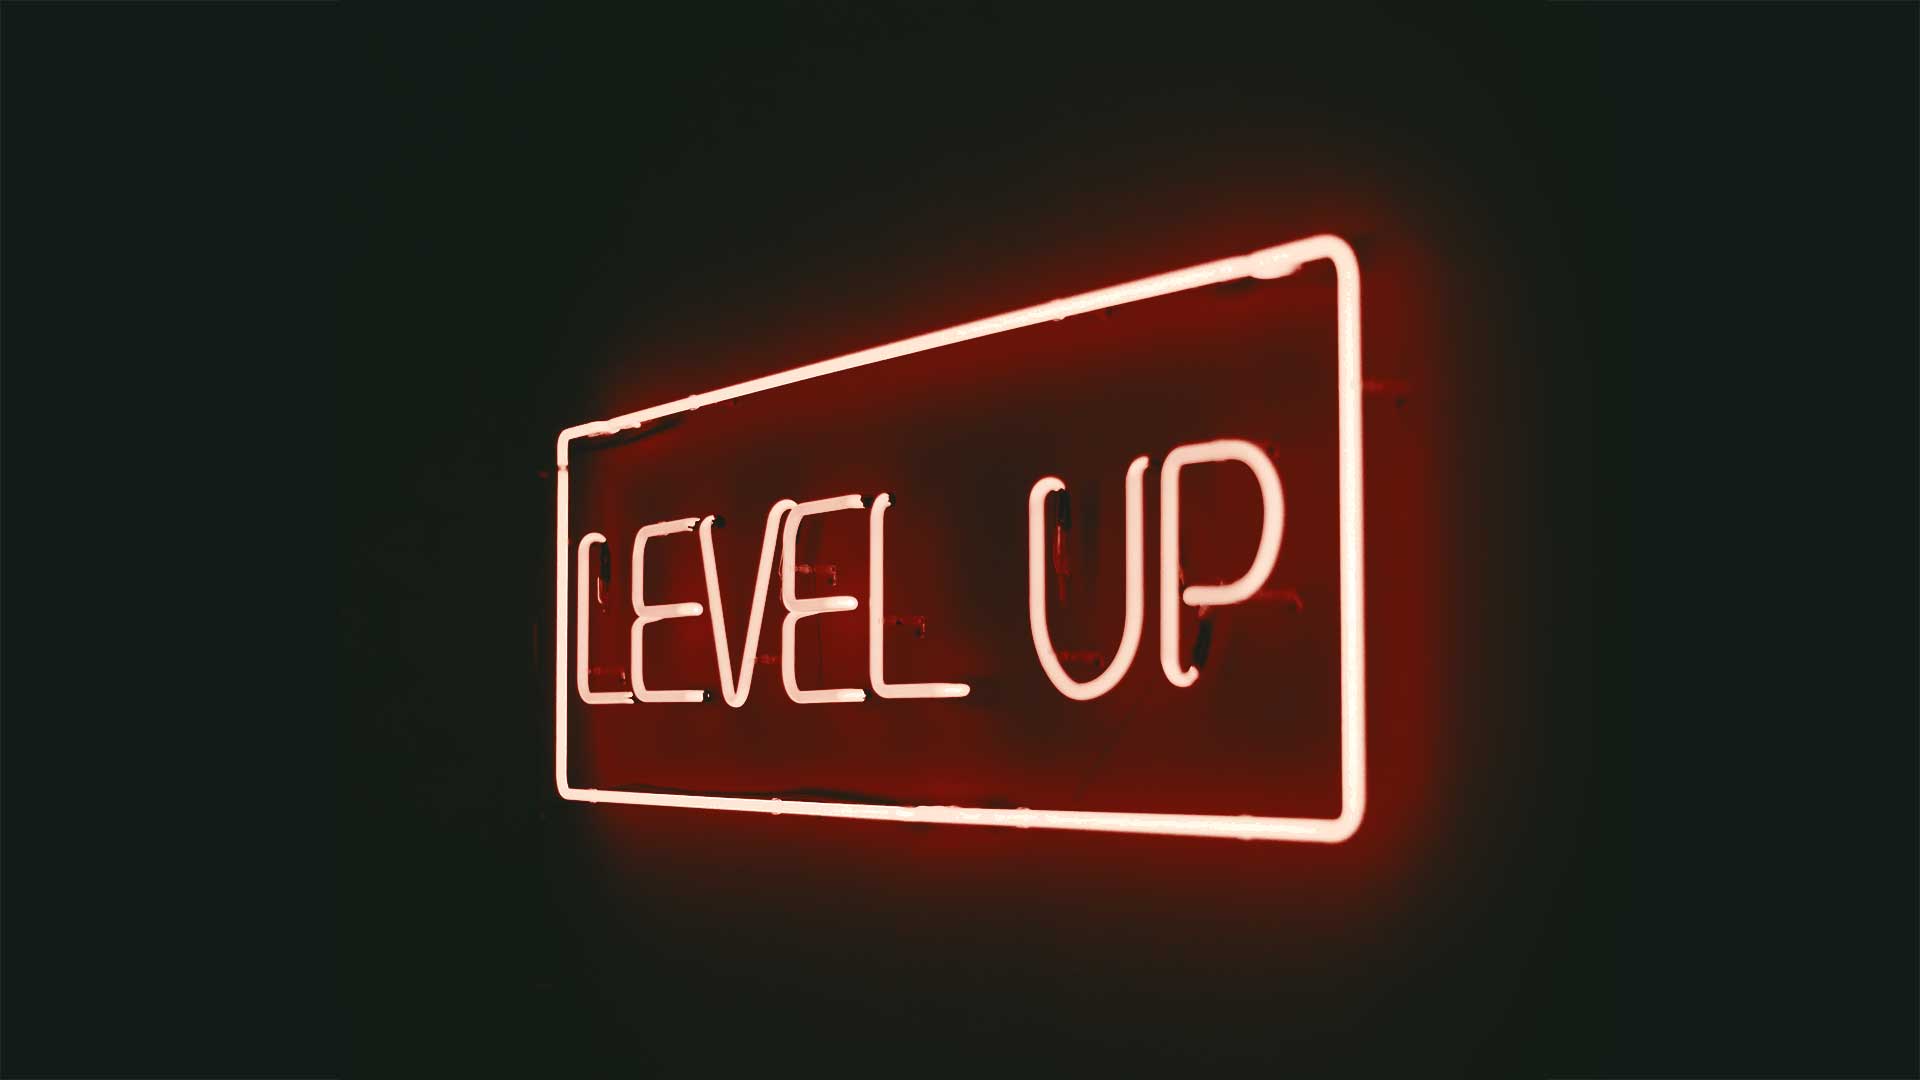 Leveling-up custom search keywords with JavaScript